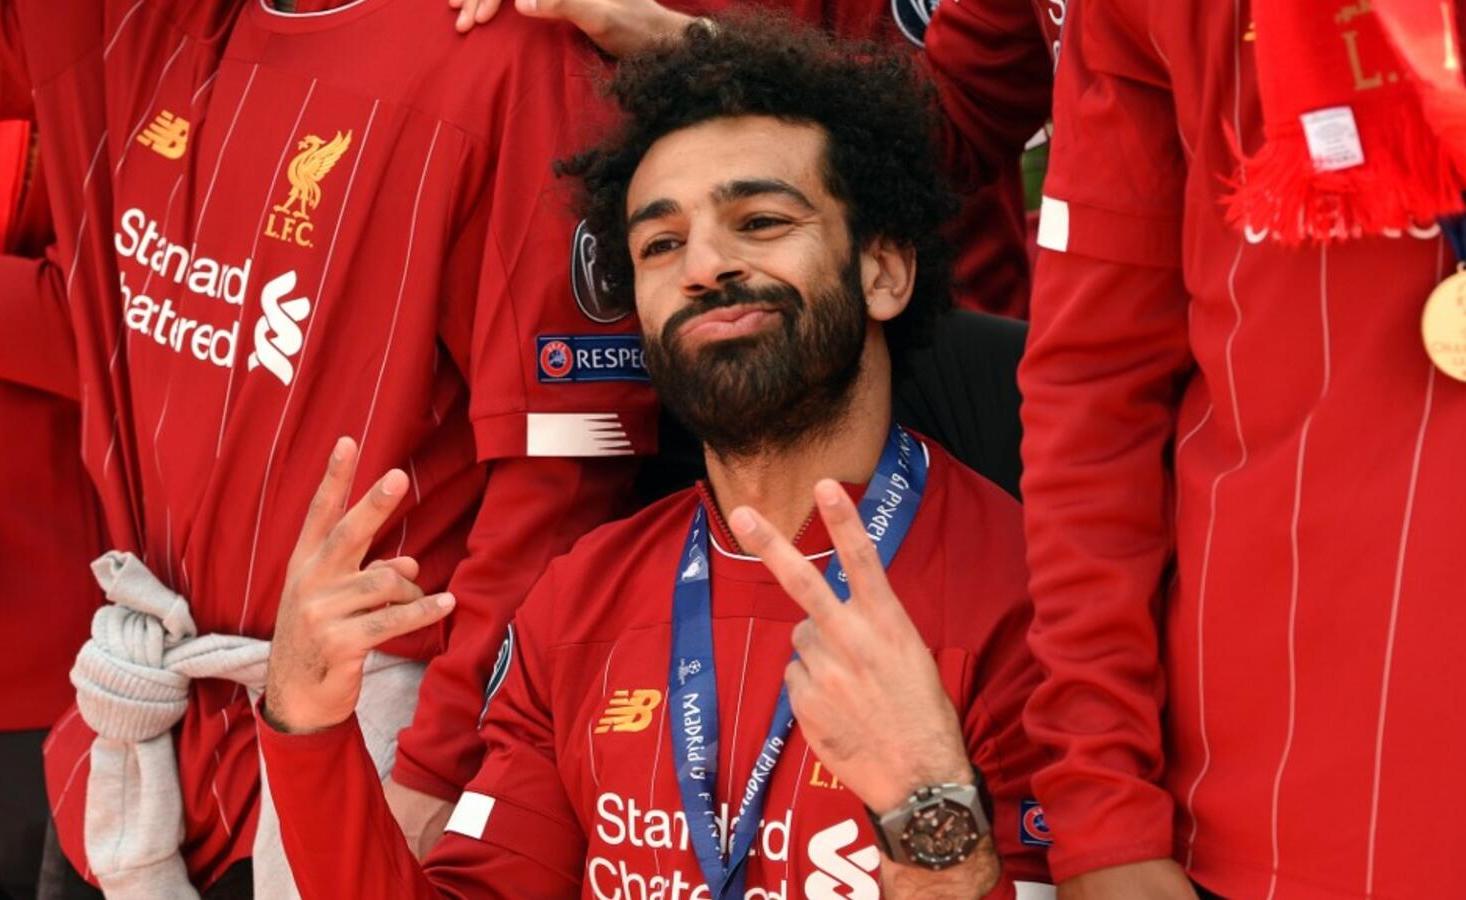 Mohamed Salah Voted Fourth Best Player in the World by Fellow Players, Managers and Journalists